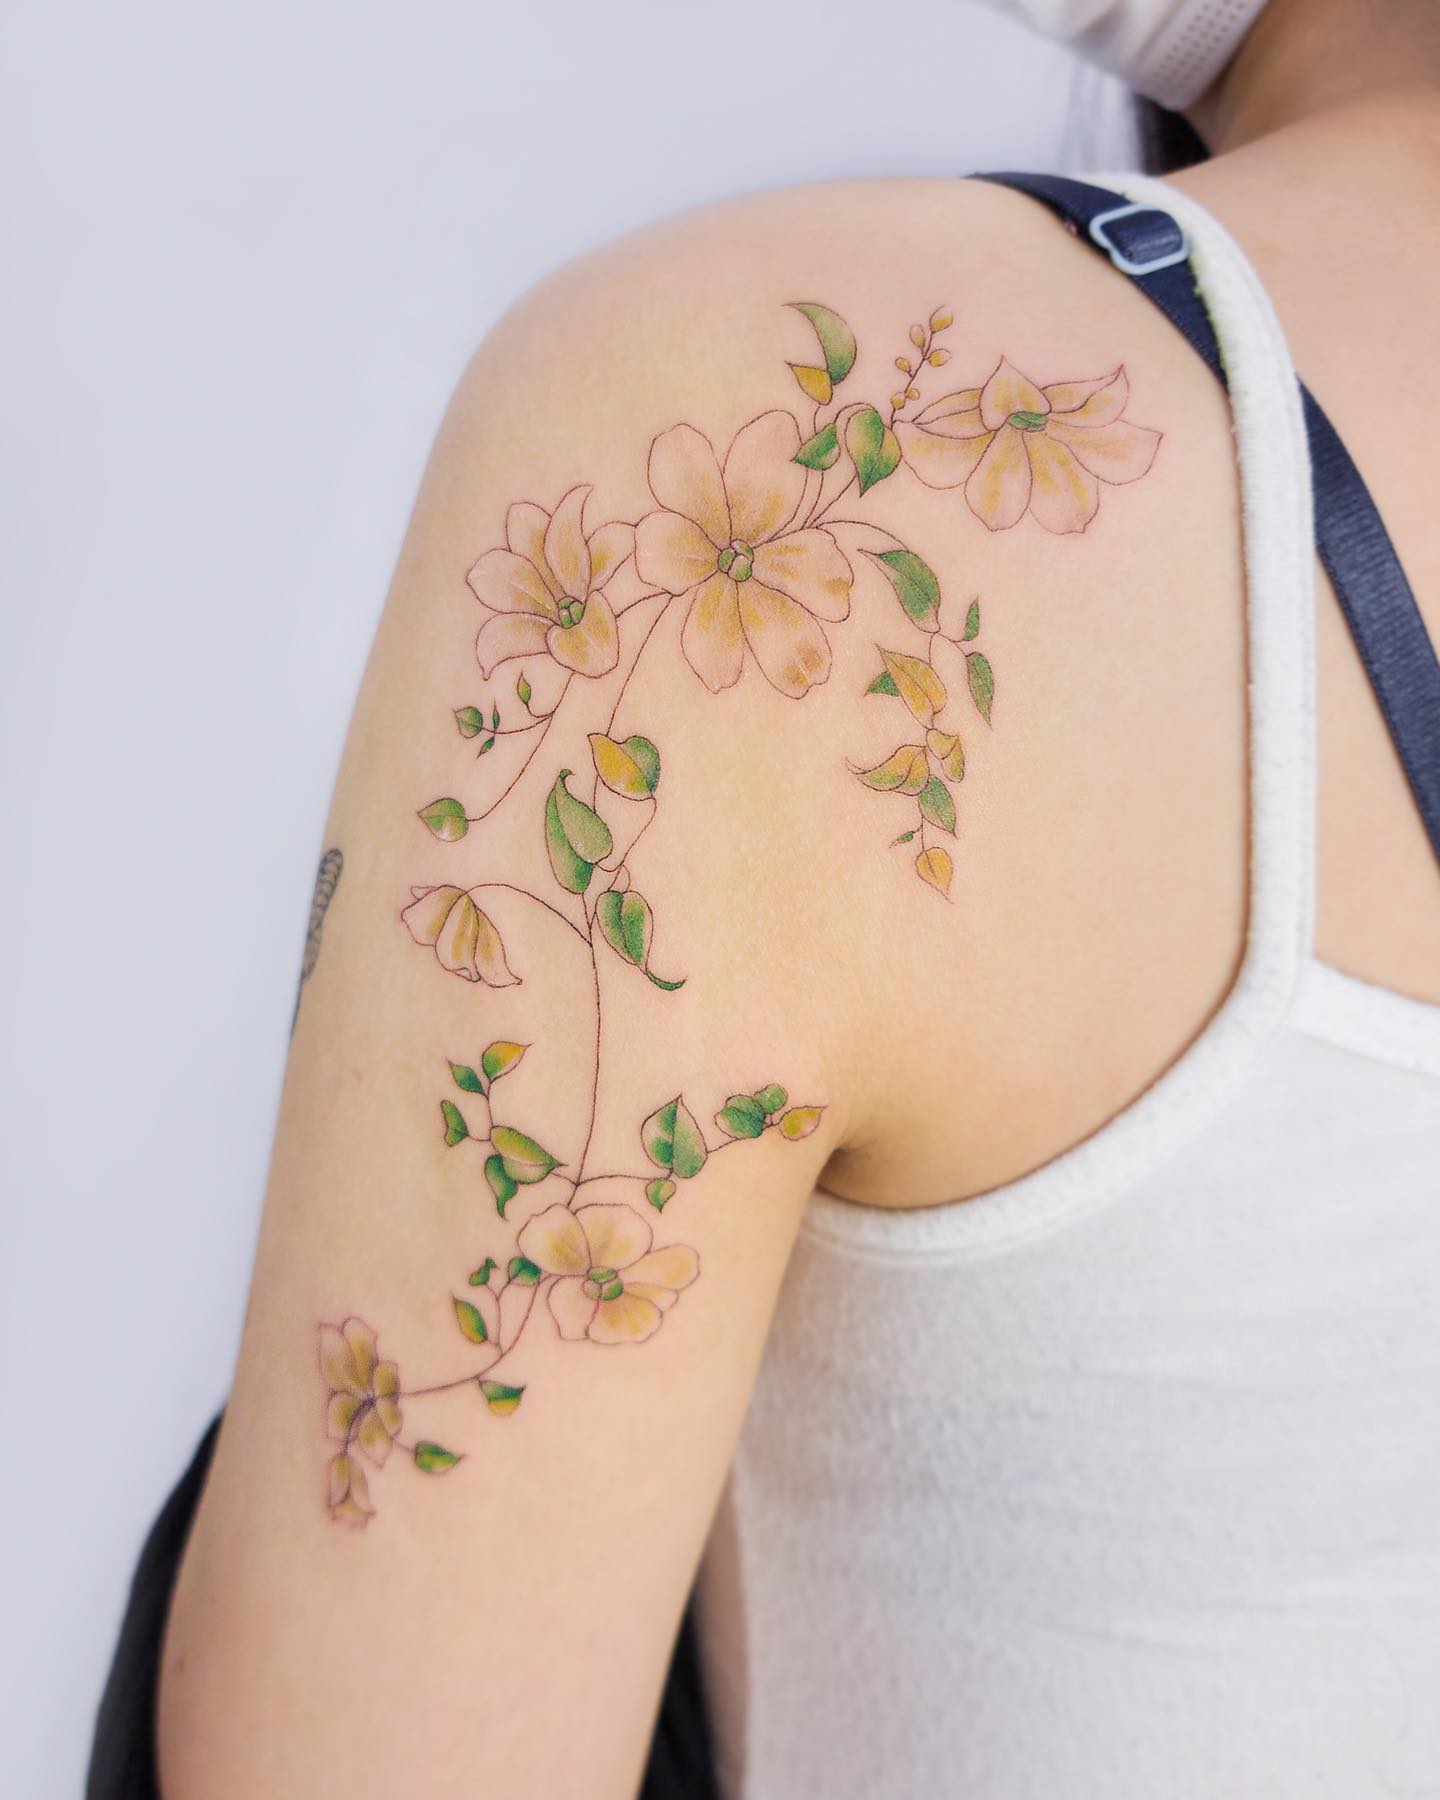 If you like floral ideas on tattoos, here is a fabulous idea to match with some leaves. A thin line is used to draw flowers and this effect looks perfect if you line this type of line artworks. Small leaves that accompany the flowers are so cute.